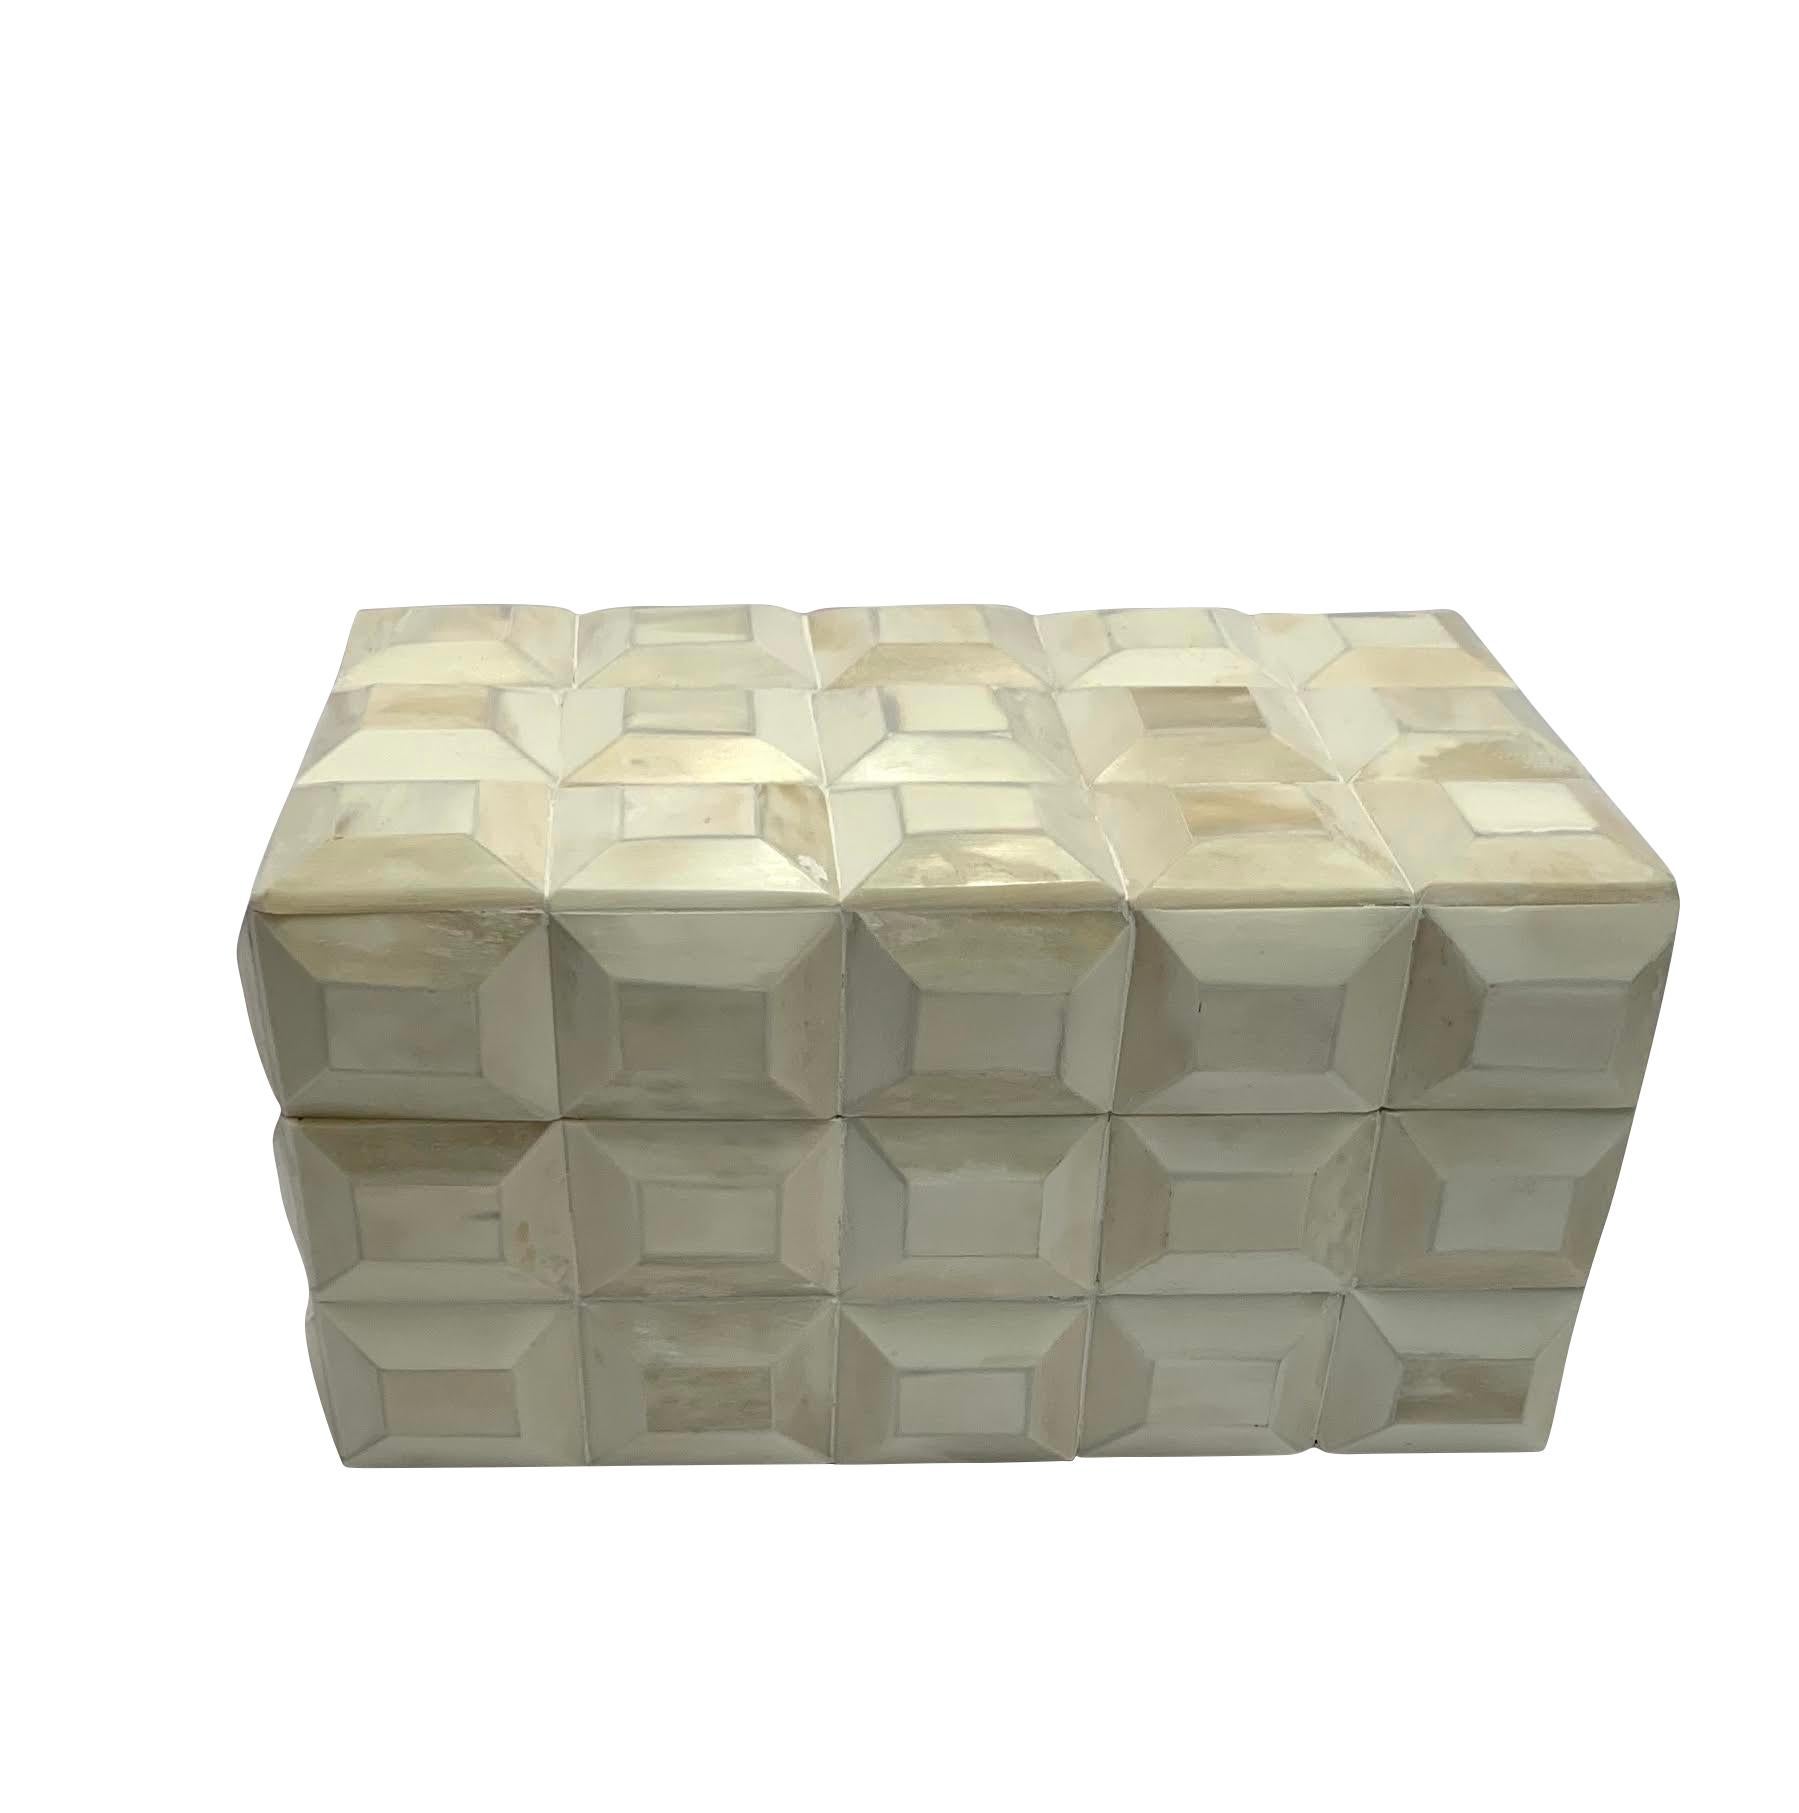 Contemporary Indian three dimensional design cream colored bone box.
Part of a large collection of bone boxes and trays.